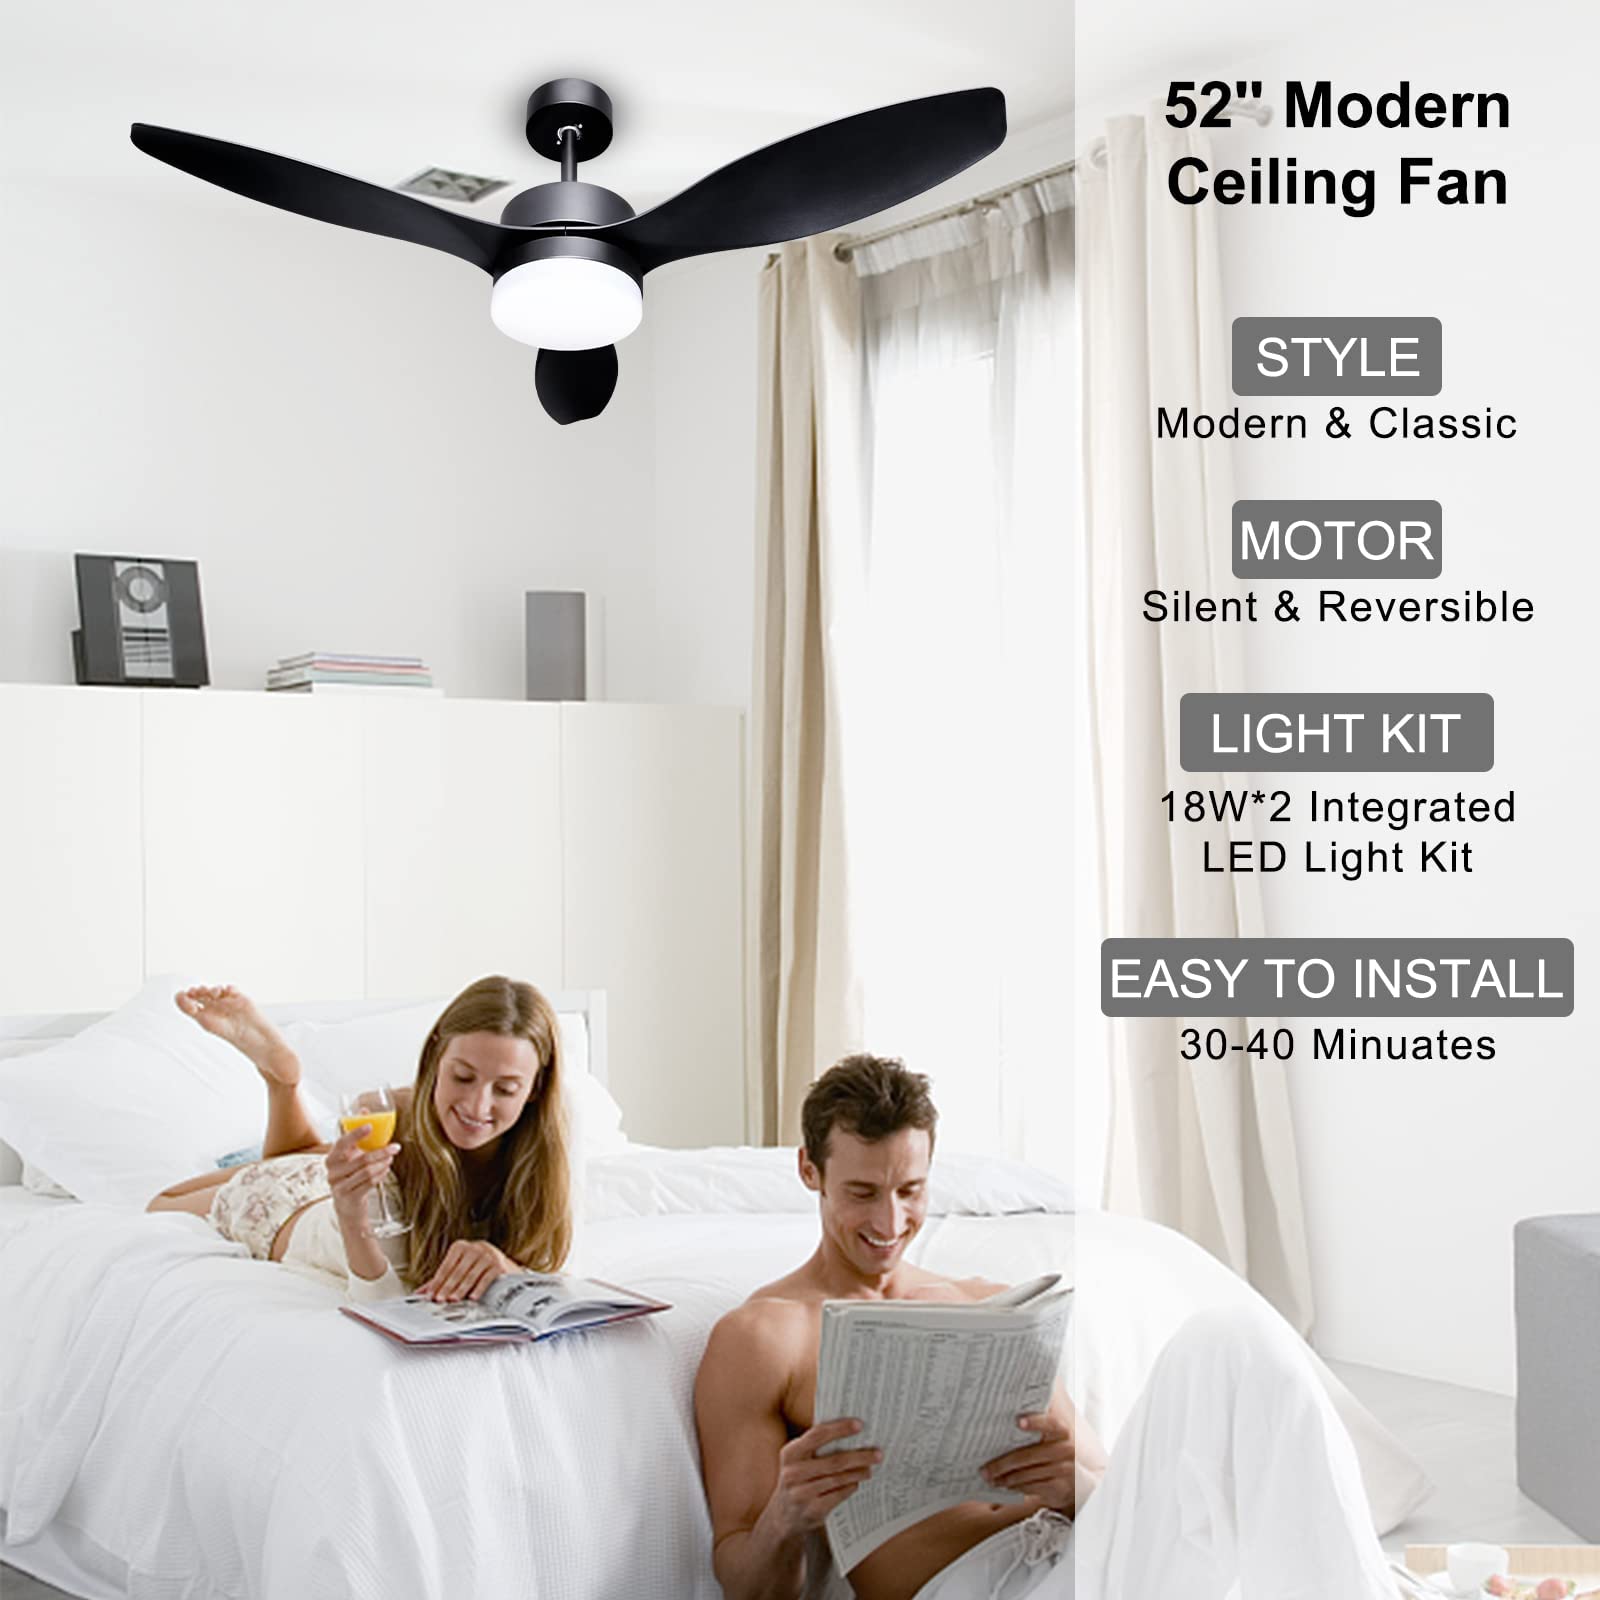 Ohniyou 52'' Ceiling Fan with Lights Remote Control,Outdoor Ceiling Fans for Patio with Light,Black Ceiling Fan Light for Bedroom Kitchen Nursery Conference